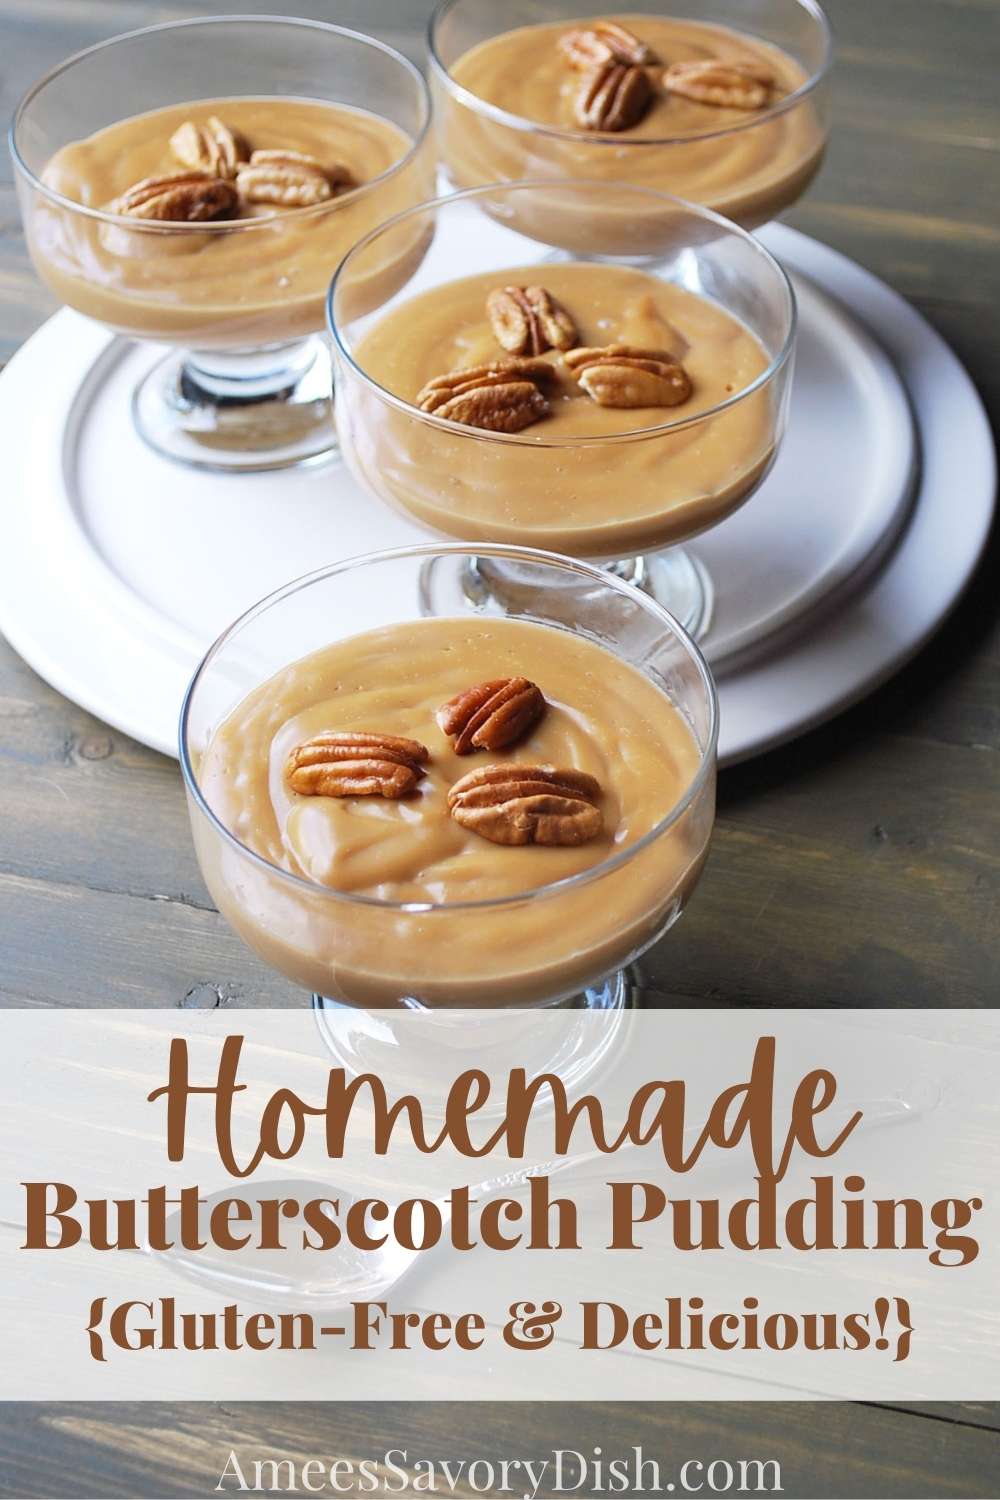 This Gluten-Free Homemade Butterscotch Pudding is rich, creamy, and incredibly delicious! #homemadepudding #glutenfreedessert #glutenfreepudding #puddingrecipe #butterscotchpudding via @Ameessavorydish